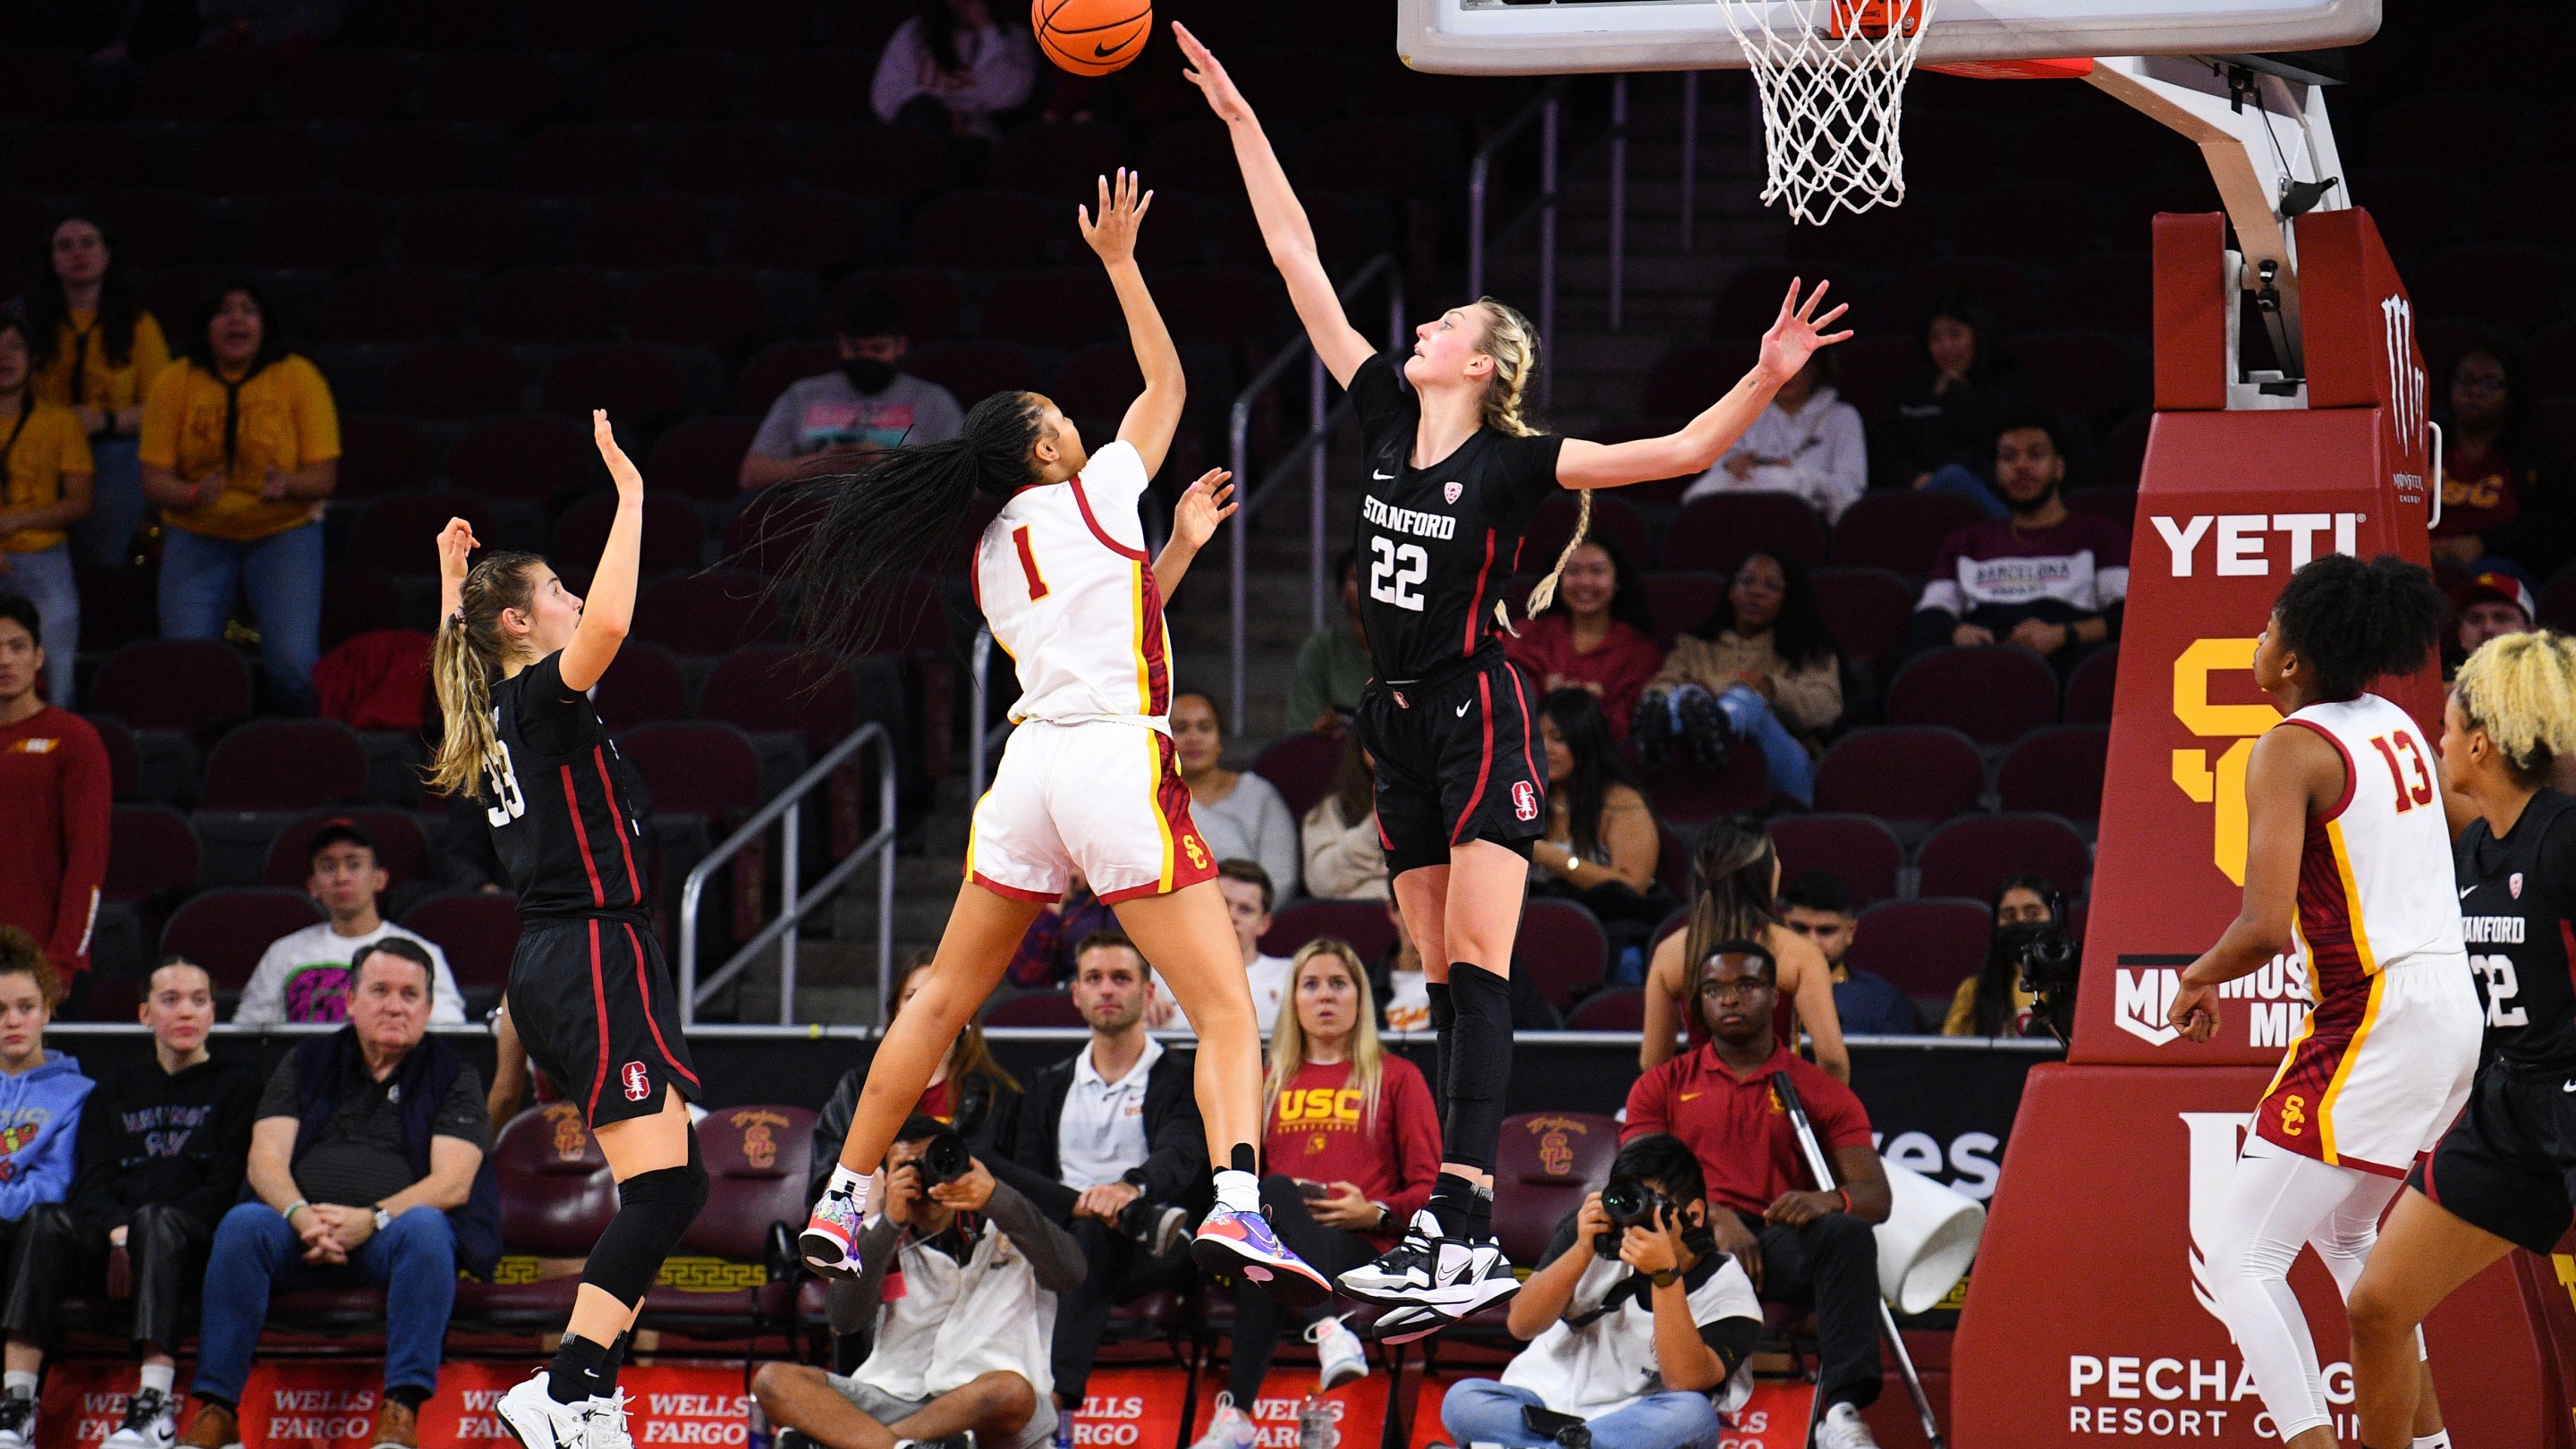 Stanford Cardinal forward Cameron Brink (22) tries to block a shot during the women's college basketball game between the Stanford Cardinal and the USC Trojans on January 15, 2023 at Galen Center in Los Angeles, CA.